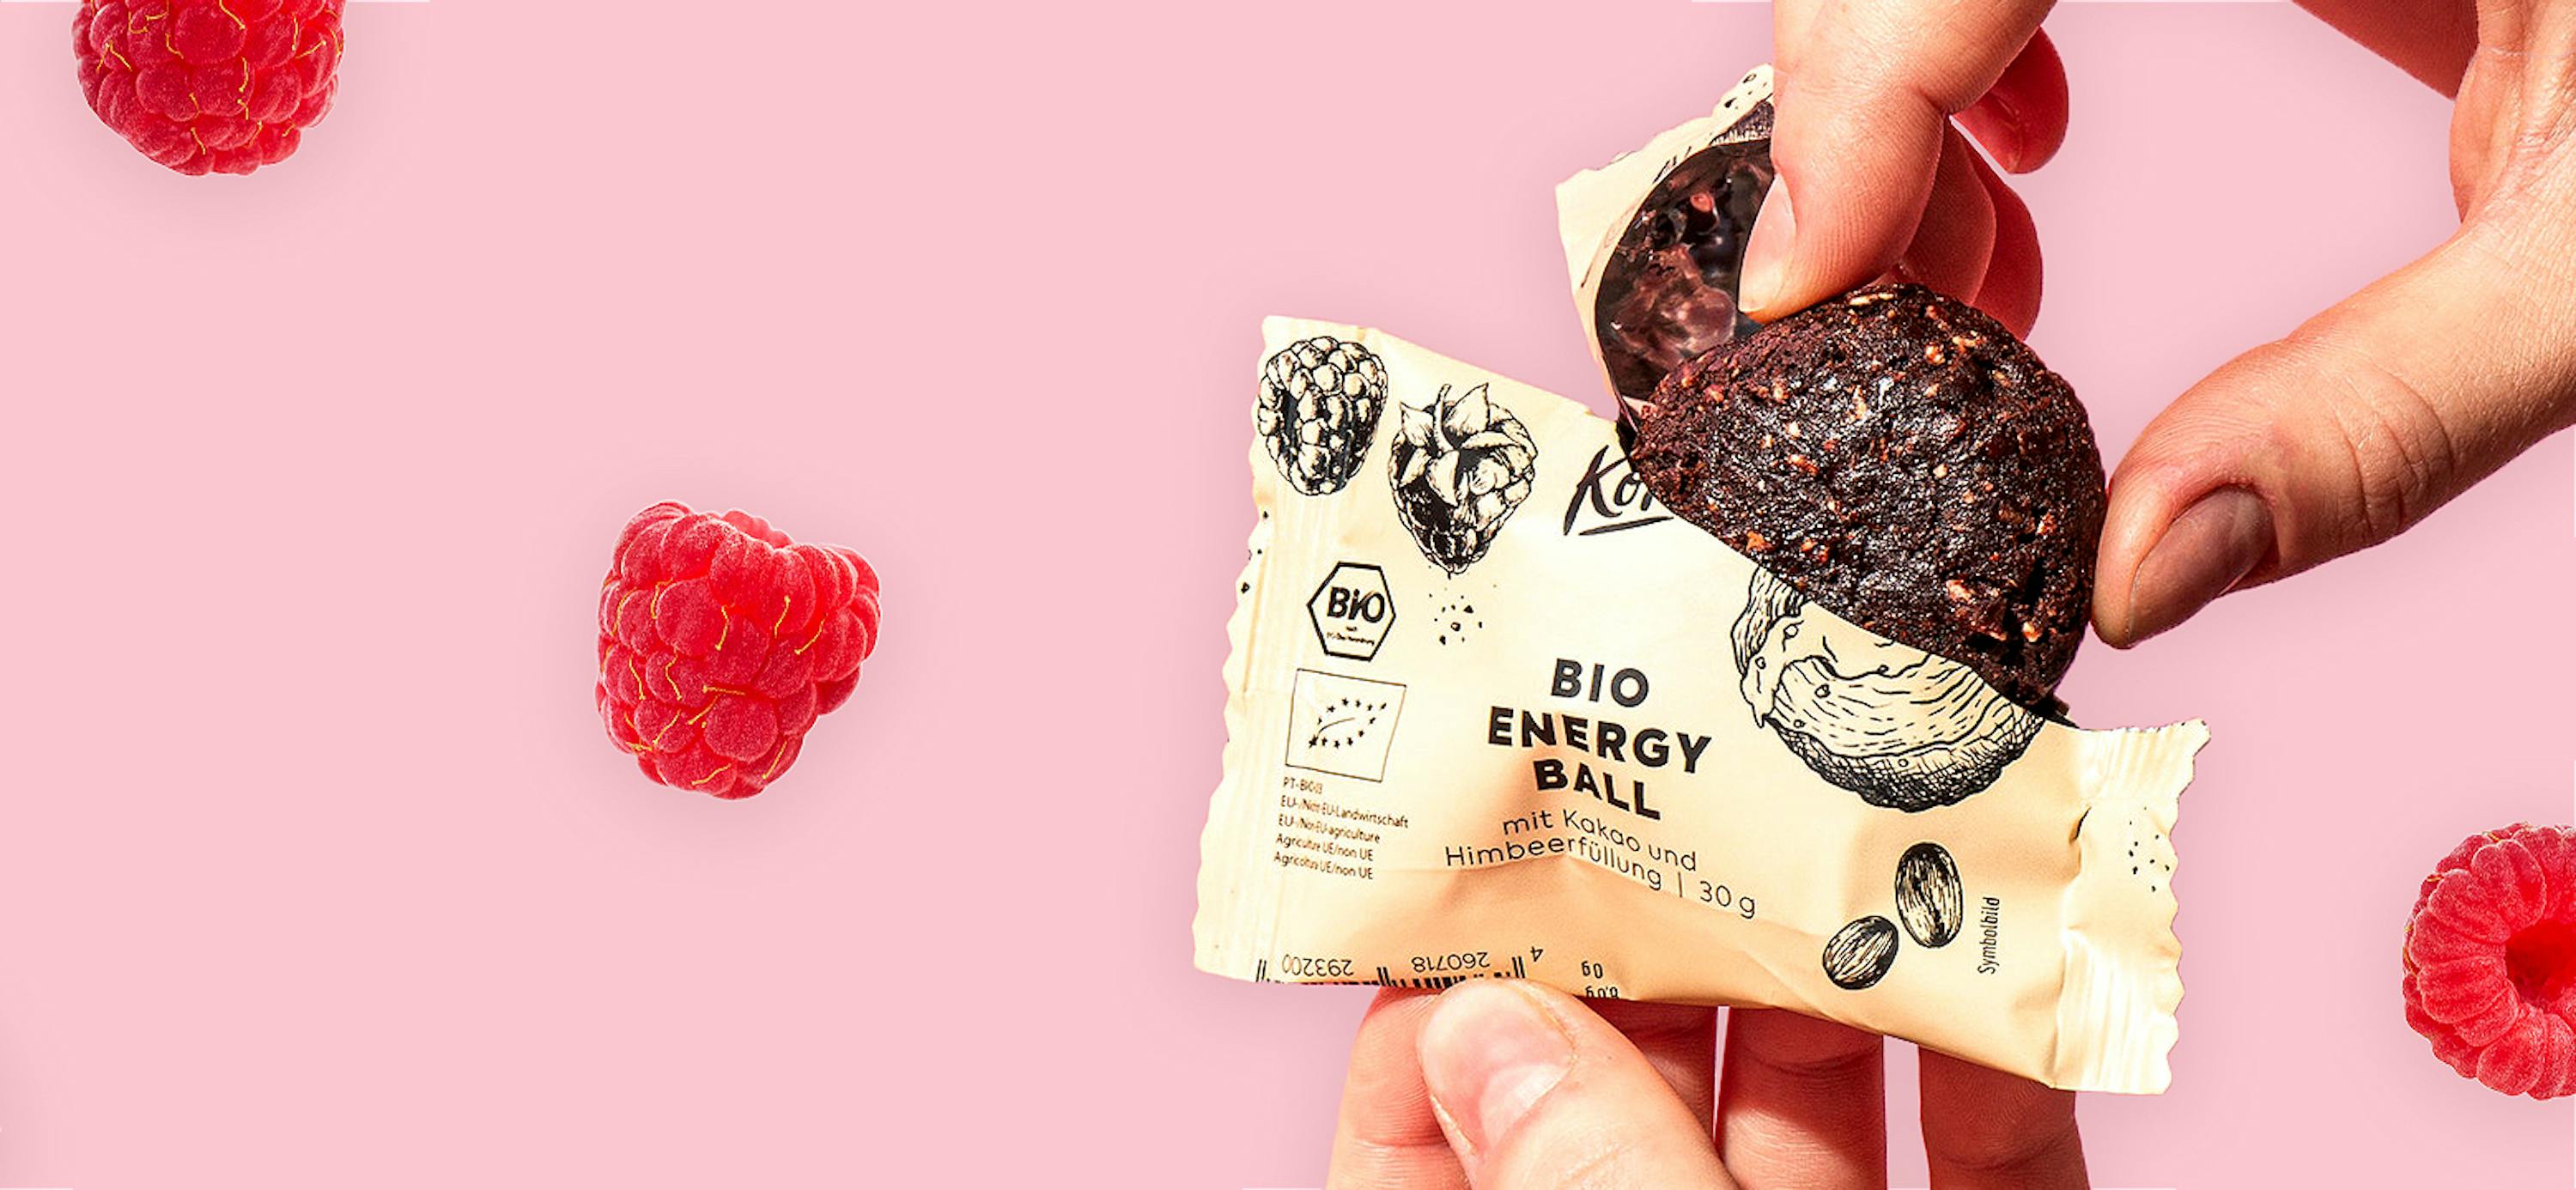 Our Energy Balls - less packaging, same content